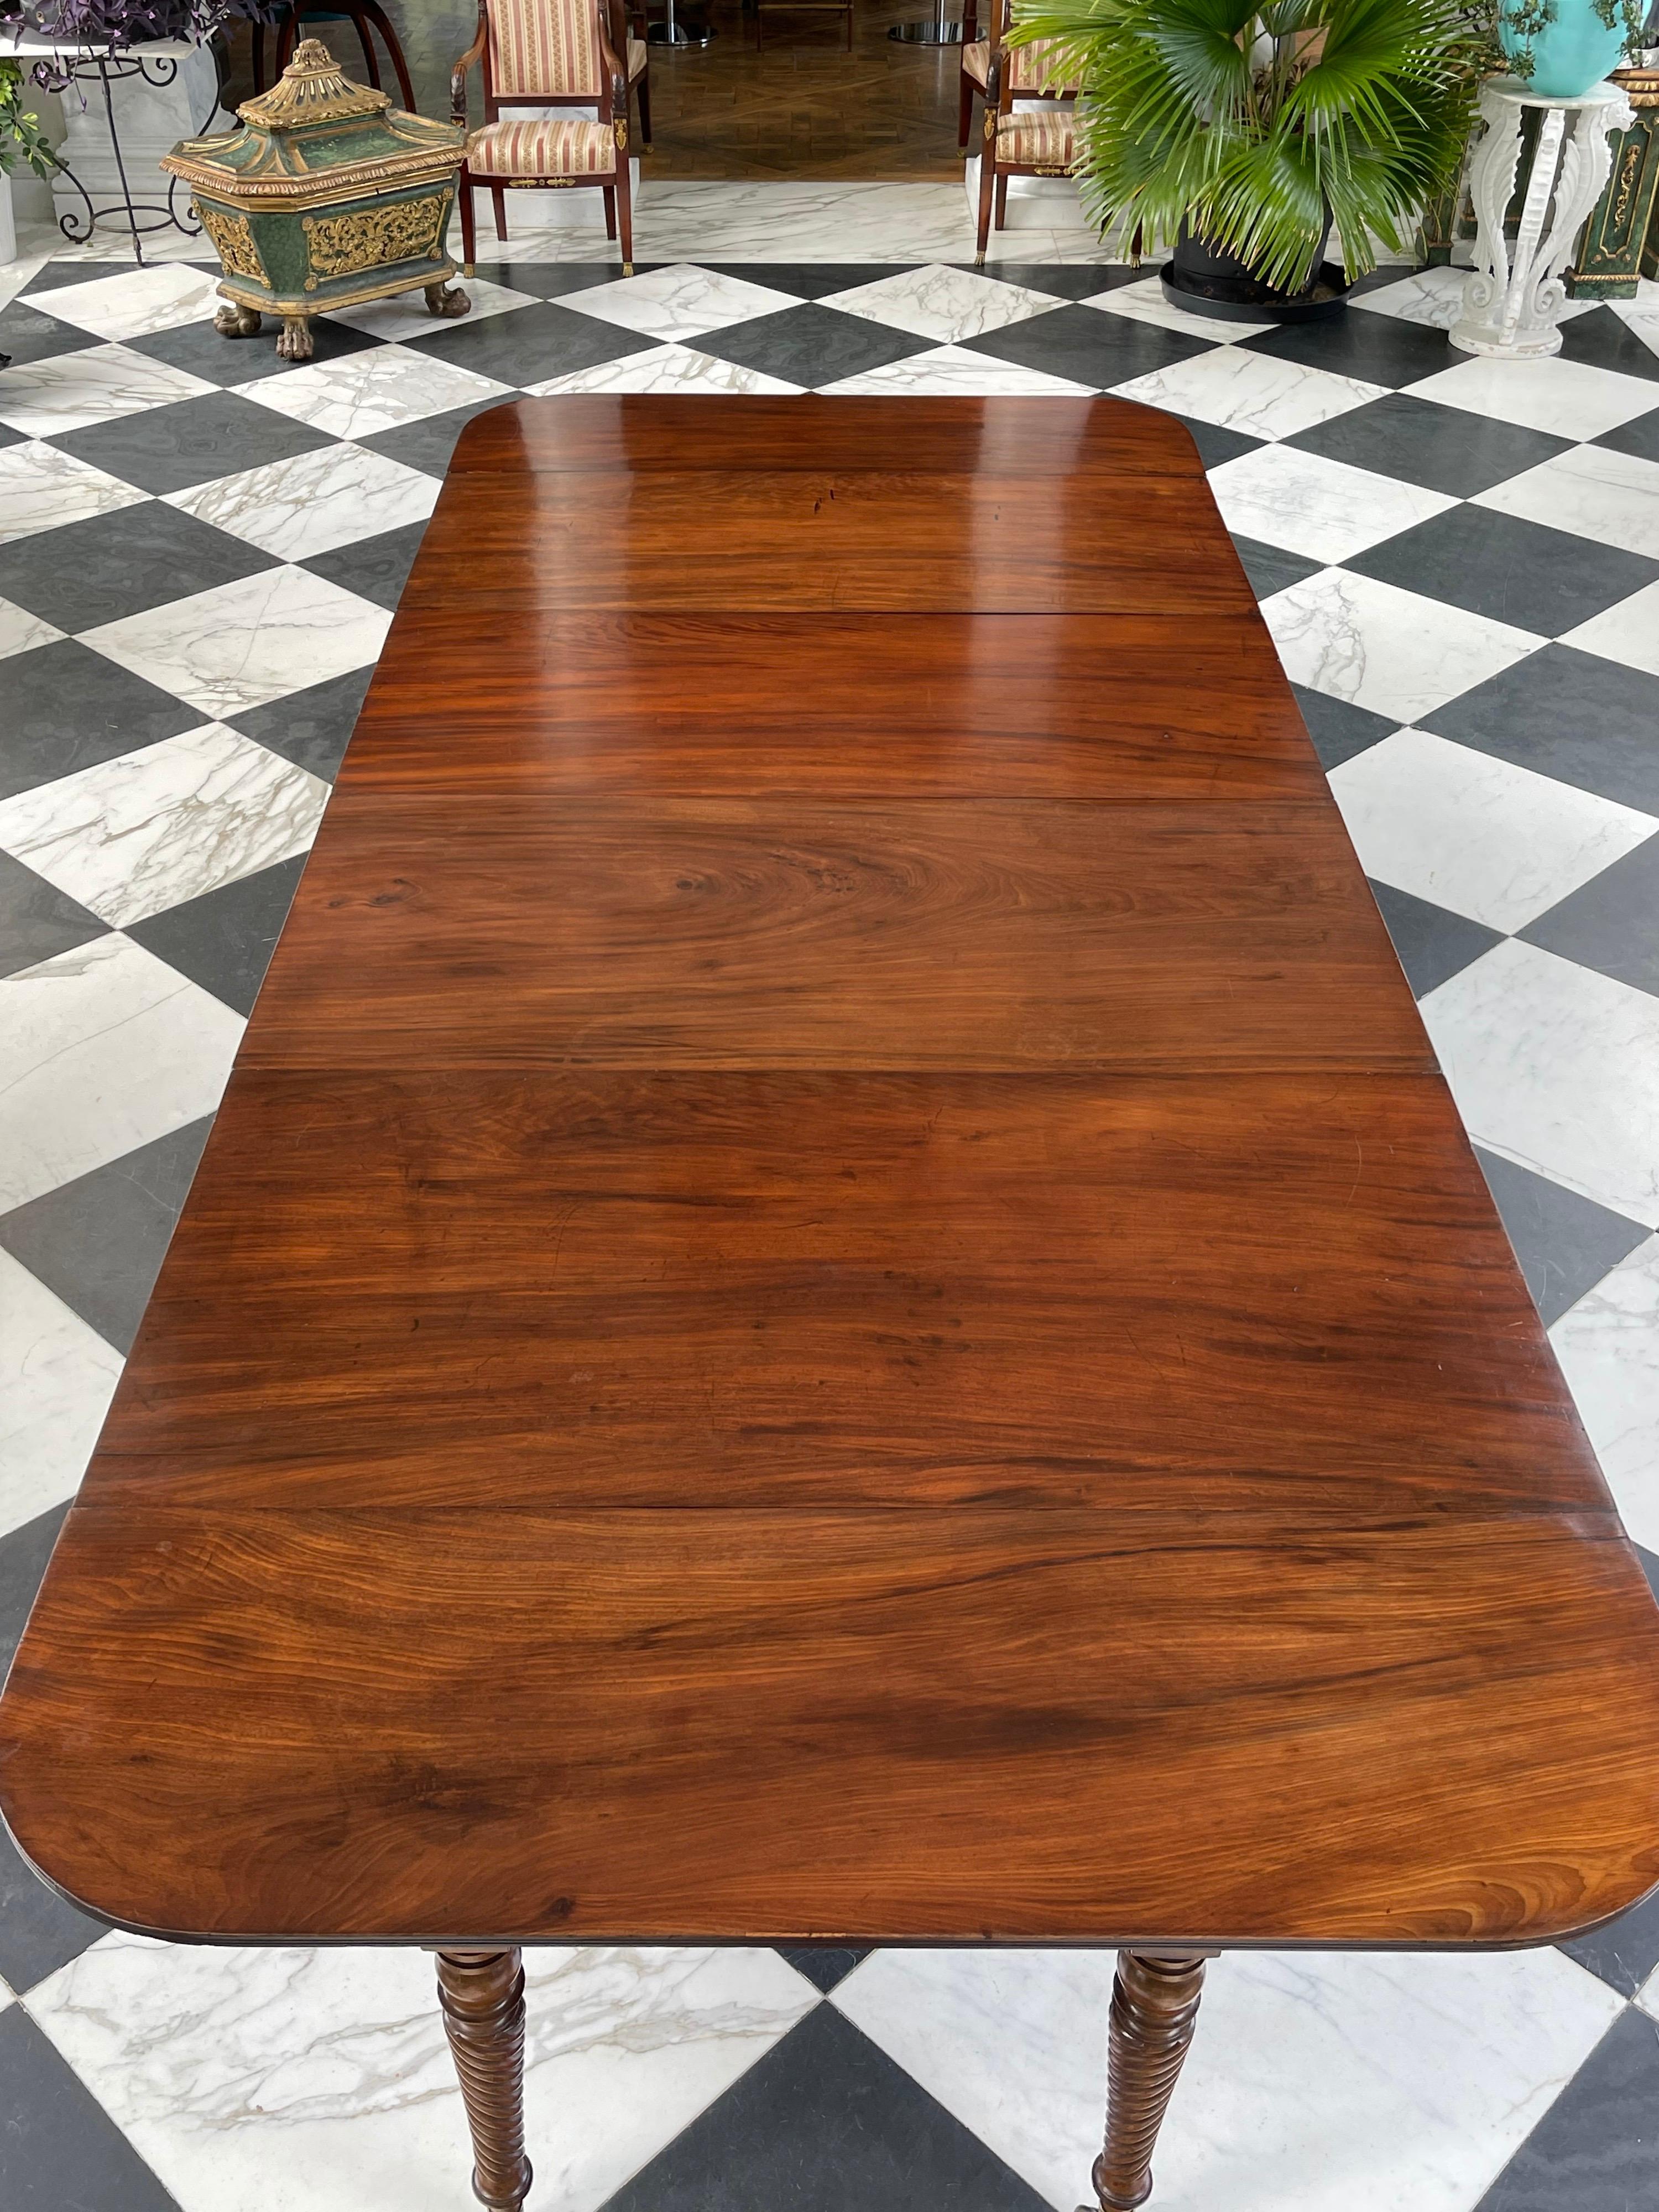 period dining table